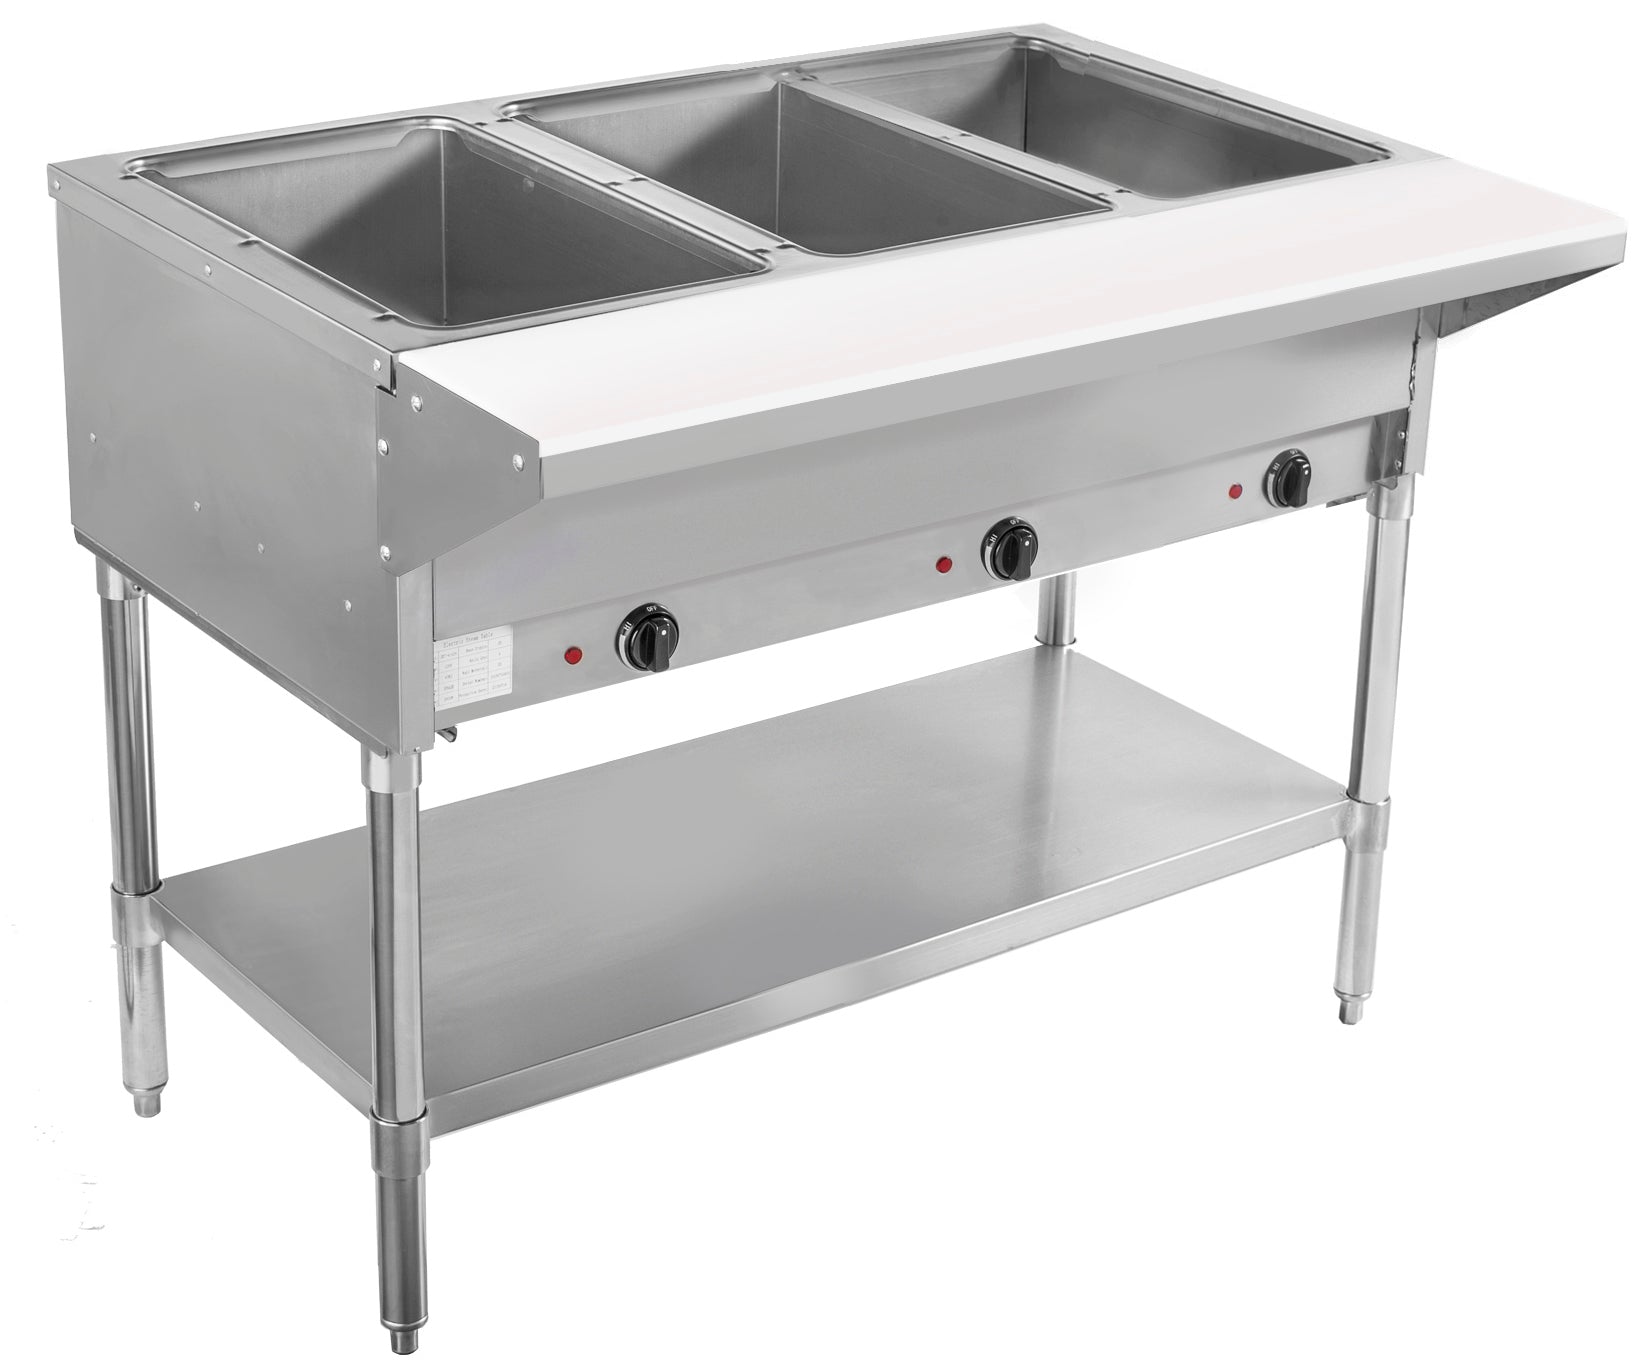 BevLes - BVST-3-120, BevLes 3 Well Electric Steam Table, 120V, in Silver